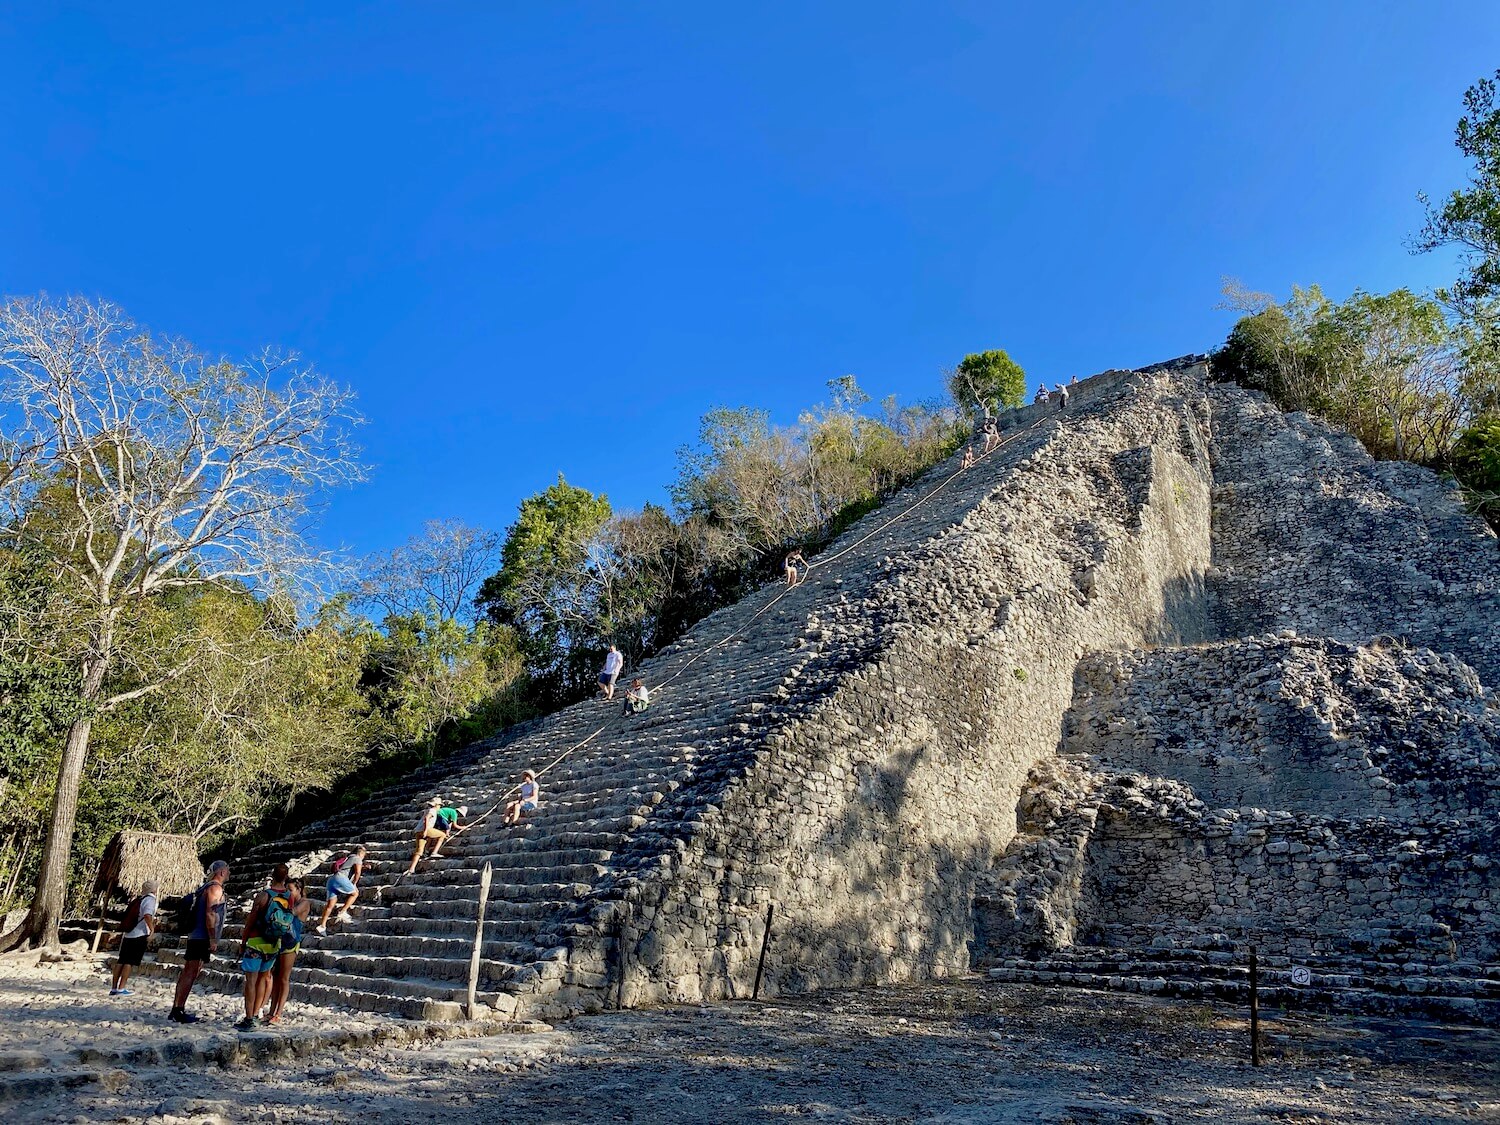 A wide view of 137 feet tall Nohoch Mul pyramid amongst the ancient mayan ruins of Coba.  The mound of rocks is the tallest pyramid on the Yucatan Peninsula.  Climbers make their way up and down the rock structure, many holding on to a rope affixed to the rocks for support.  Jungle trees stand in the background amongst a bright blue sky day.  